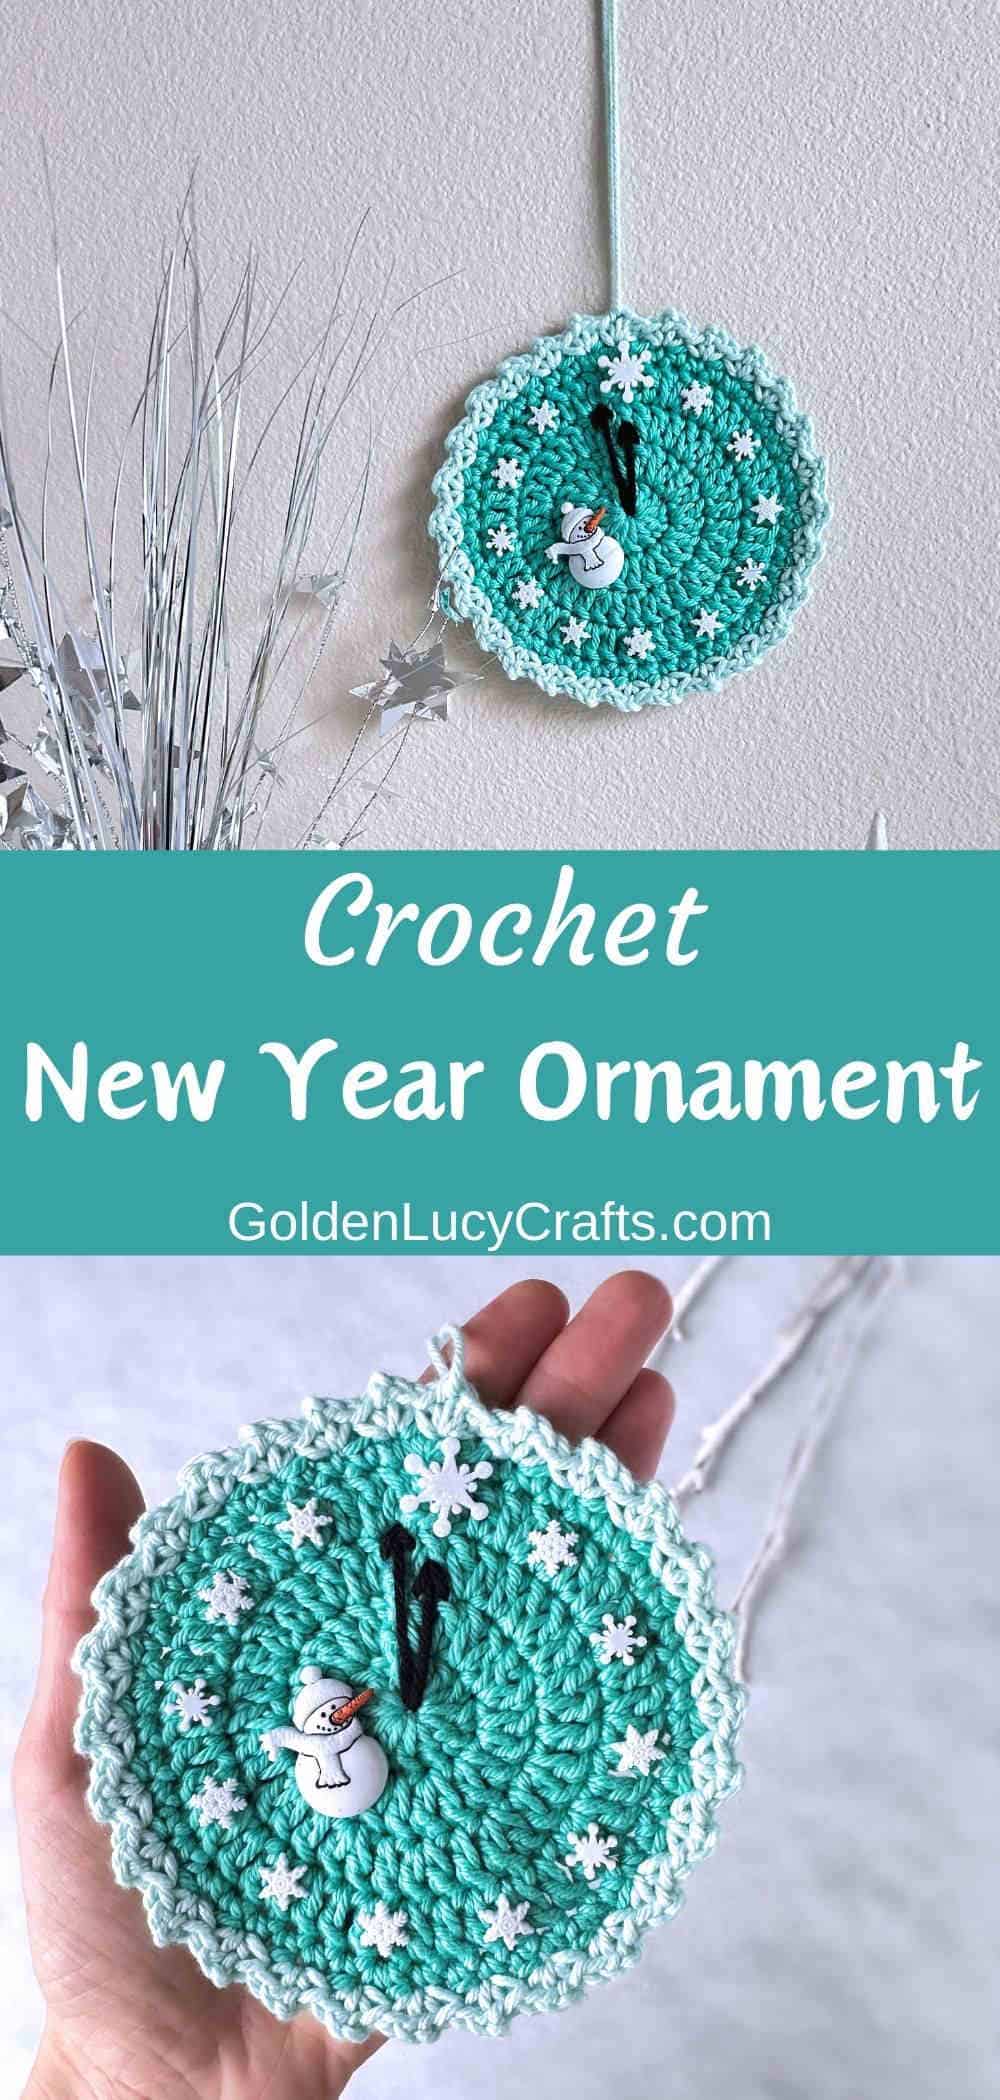 Crochet New Year ornament made in teal color.